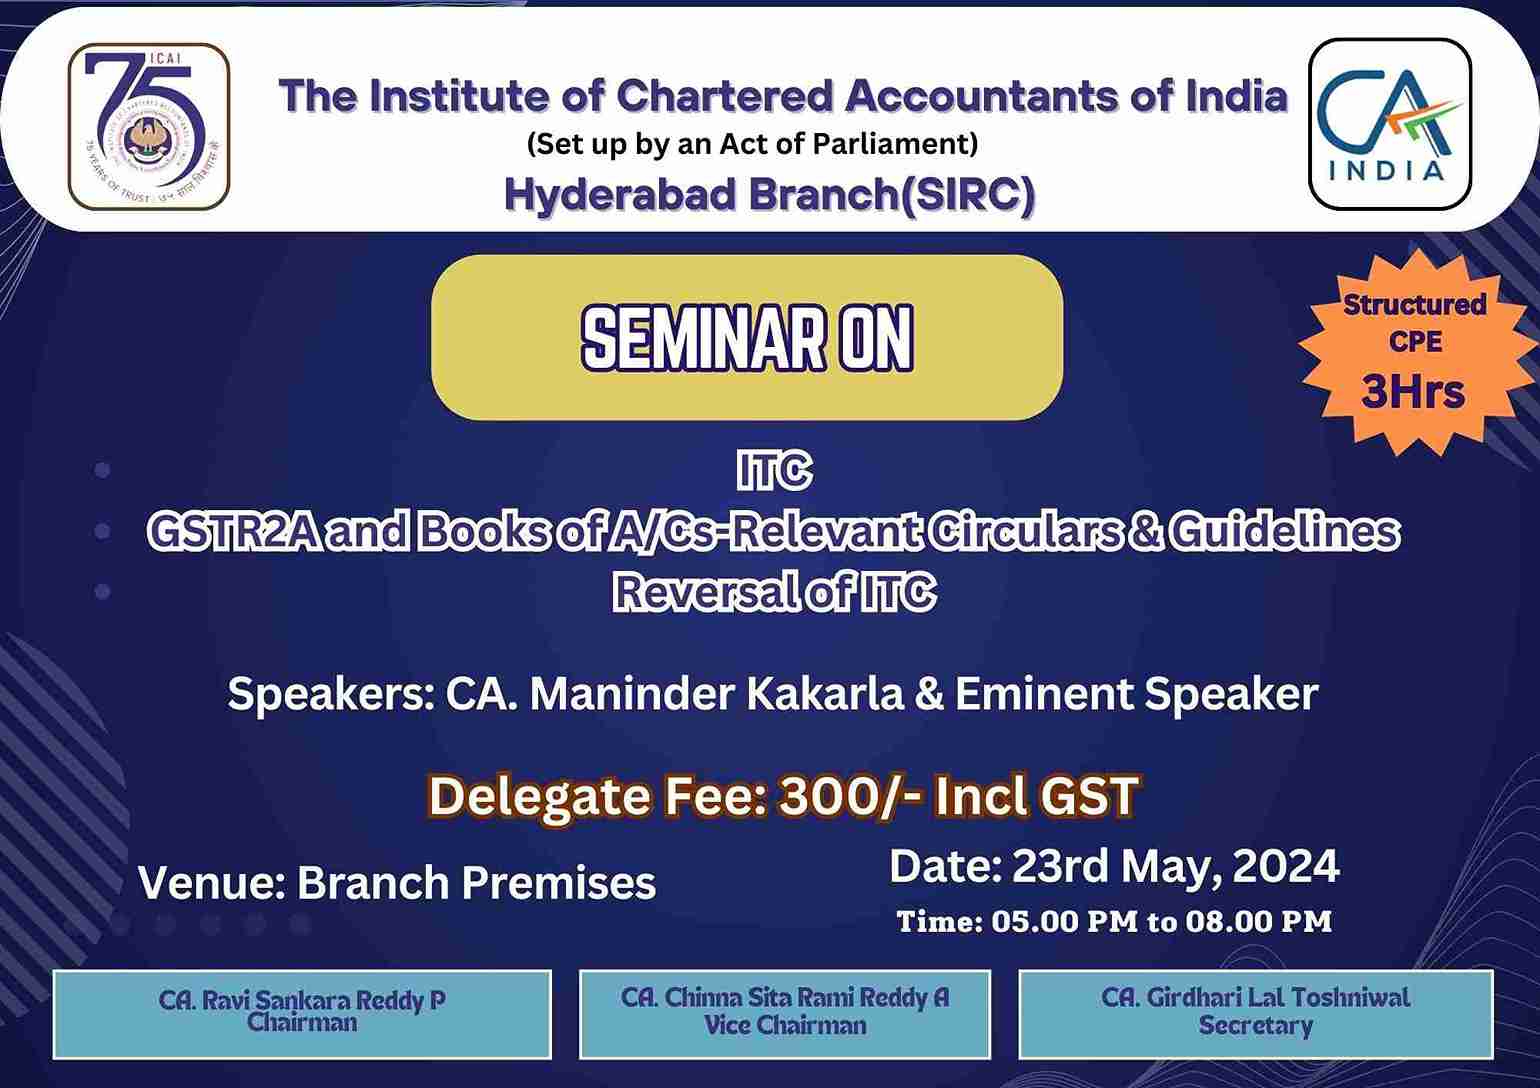 Seminar on ITC GSTR2A and Books of A/Cs-Relevant Circulars & Guidelines Reversal of ITC 